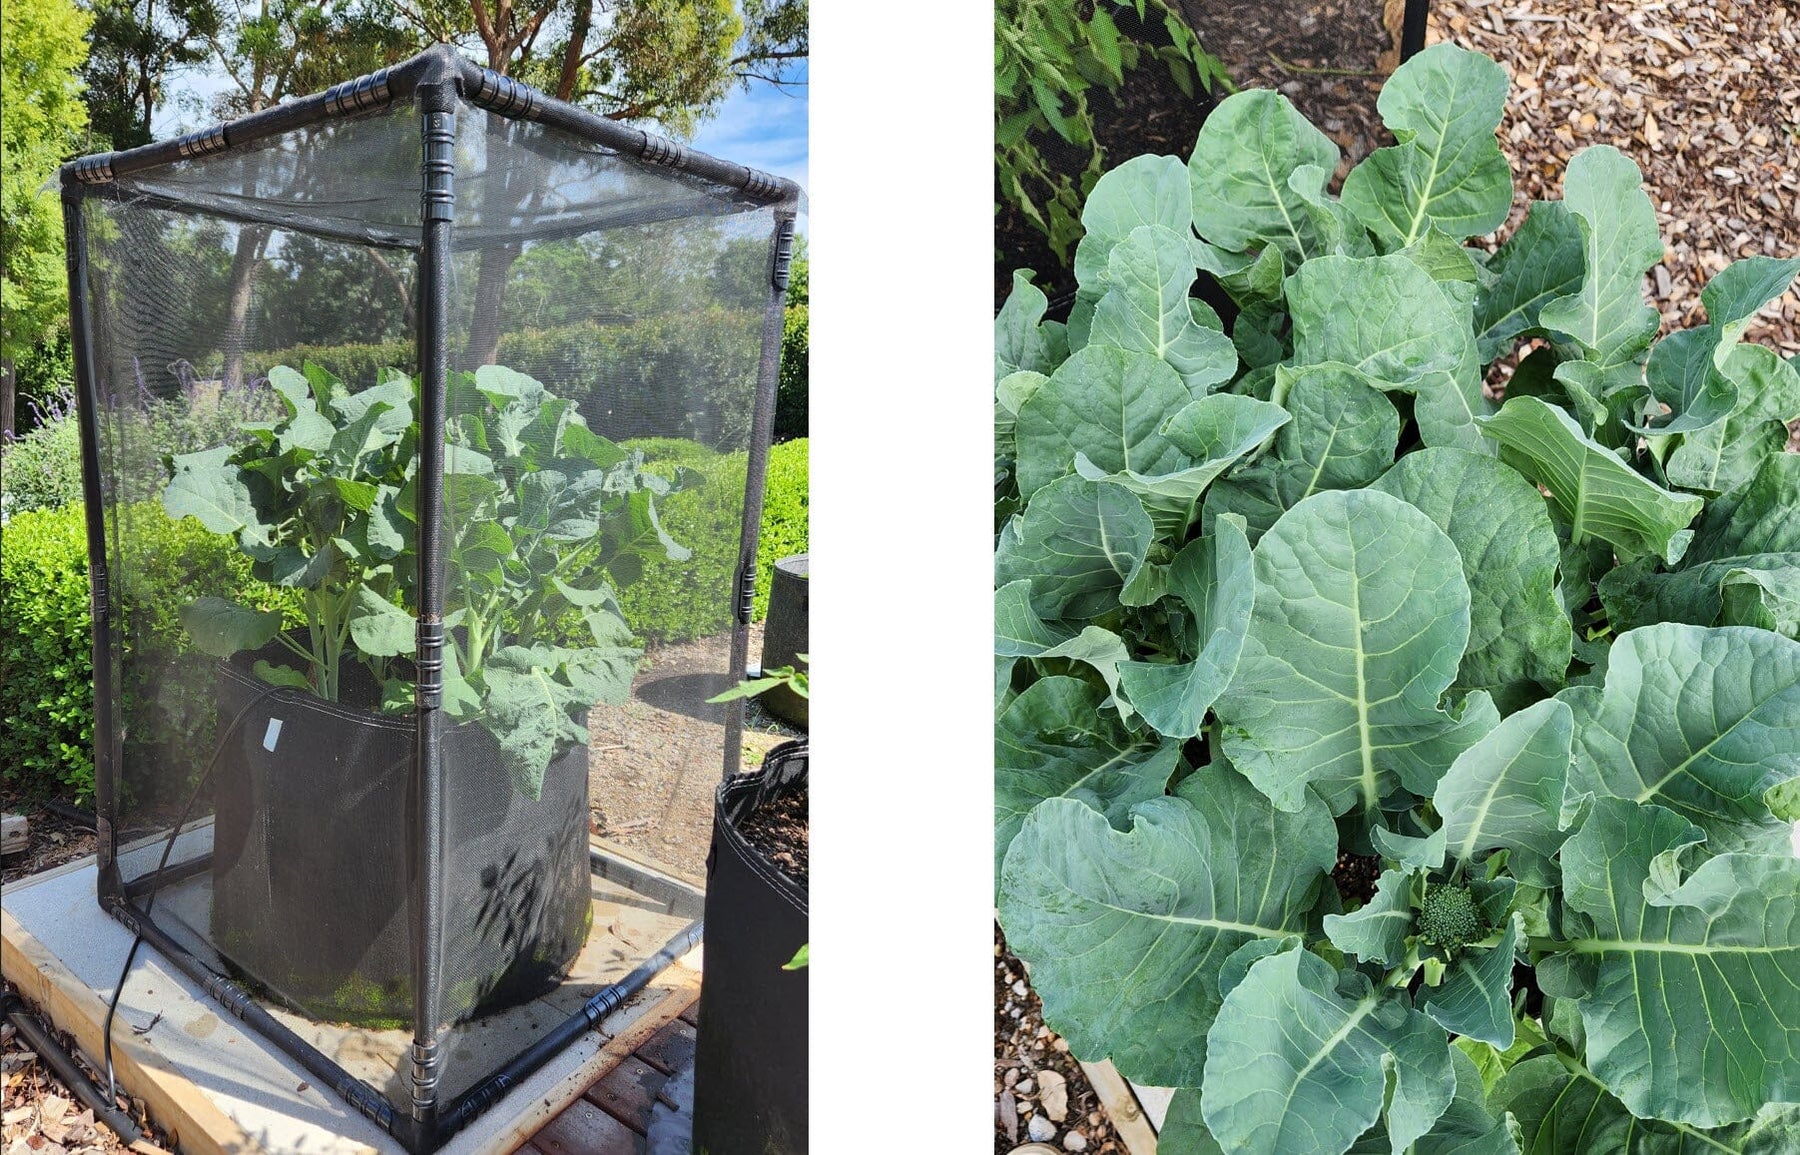 Growing broccoli organically verses current farming practices